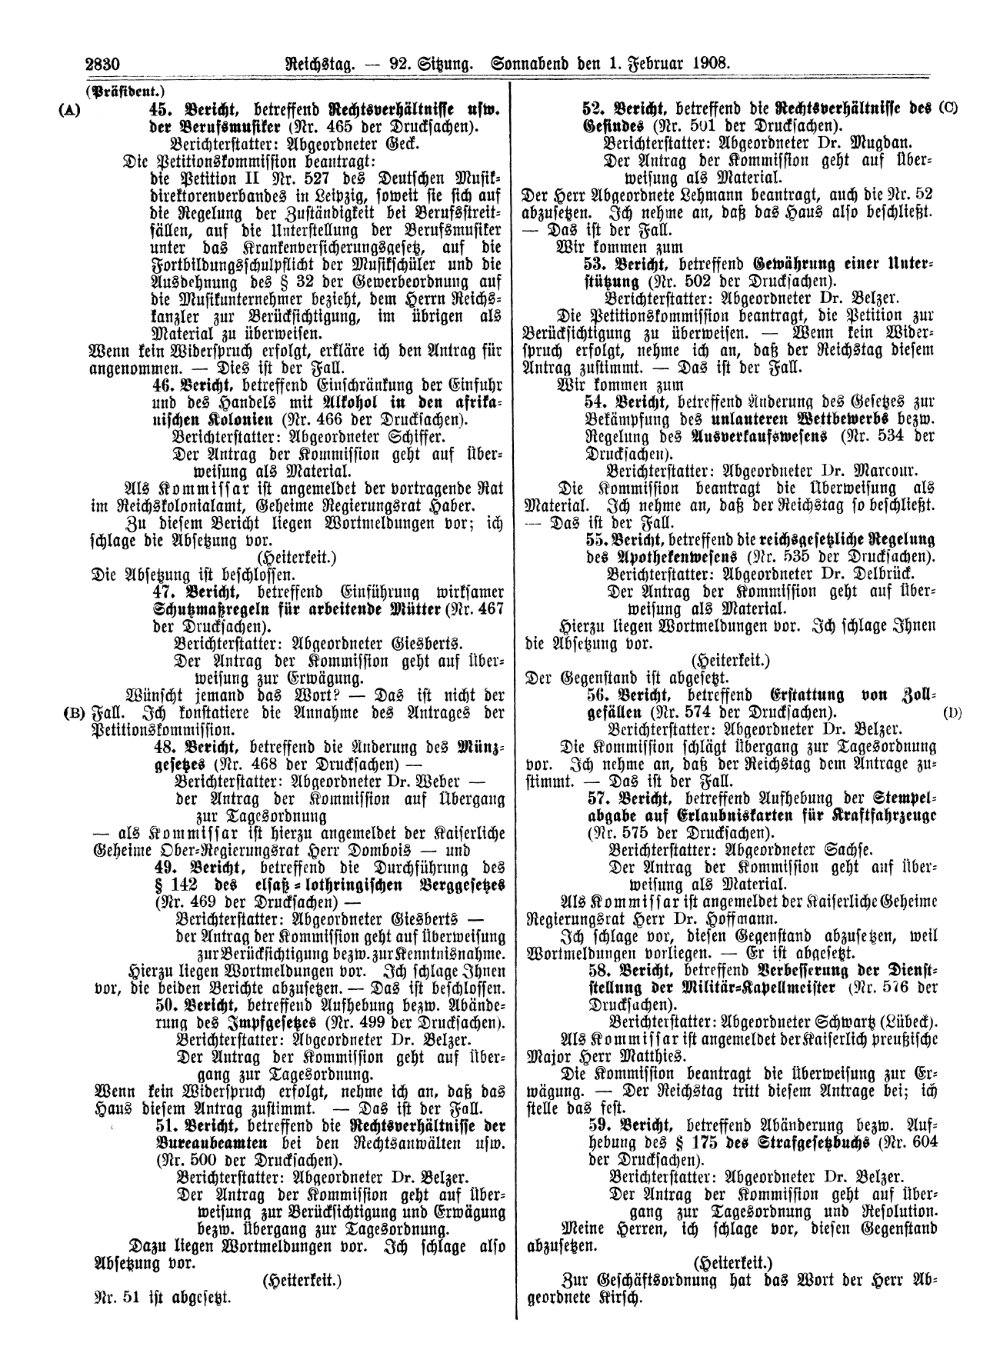 Scan of page 2830